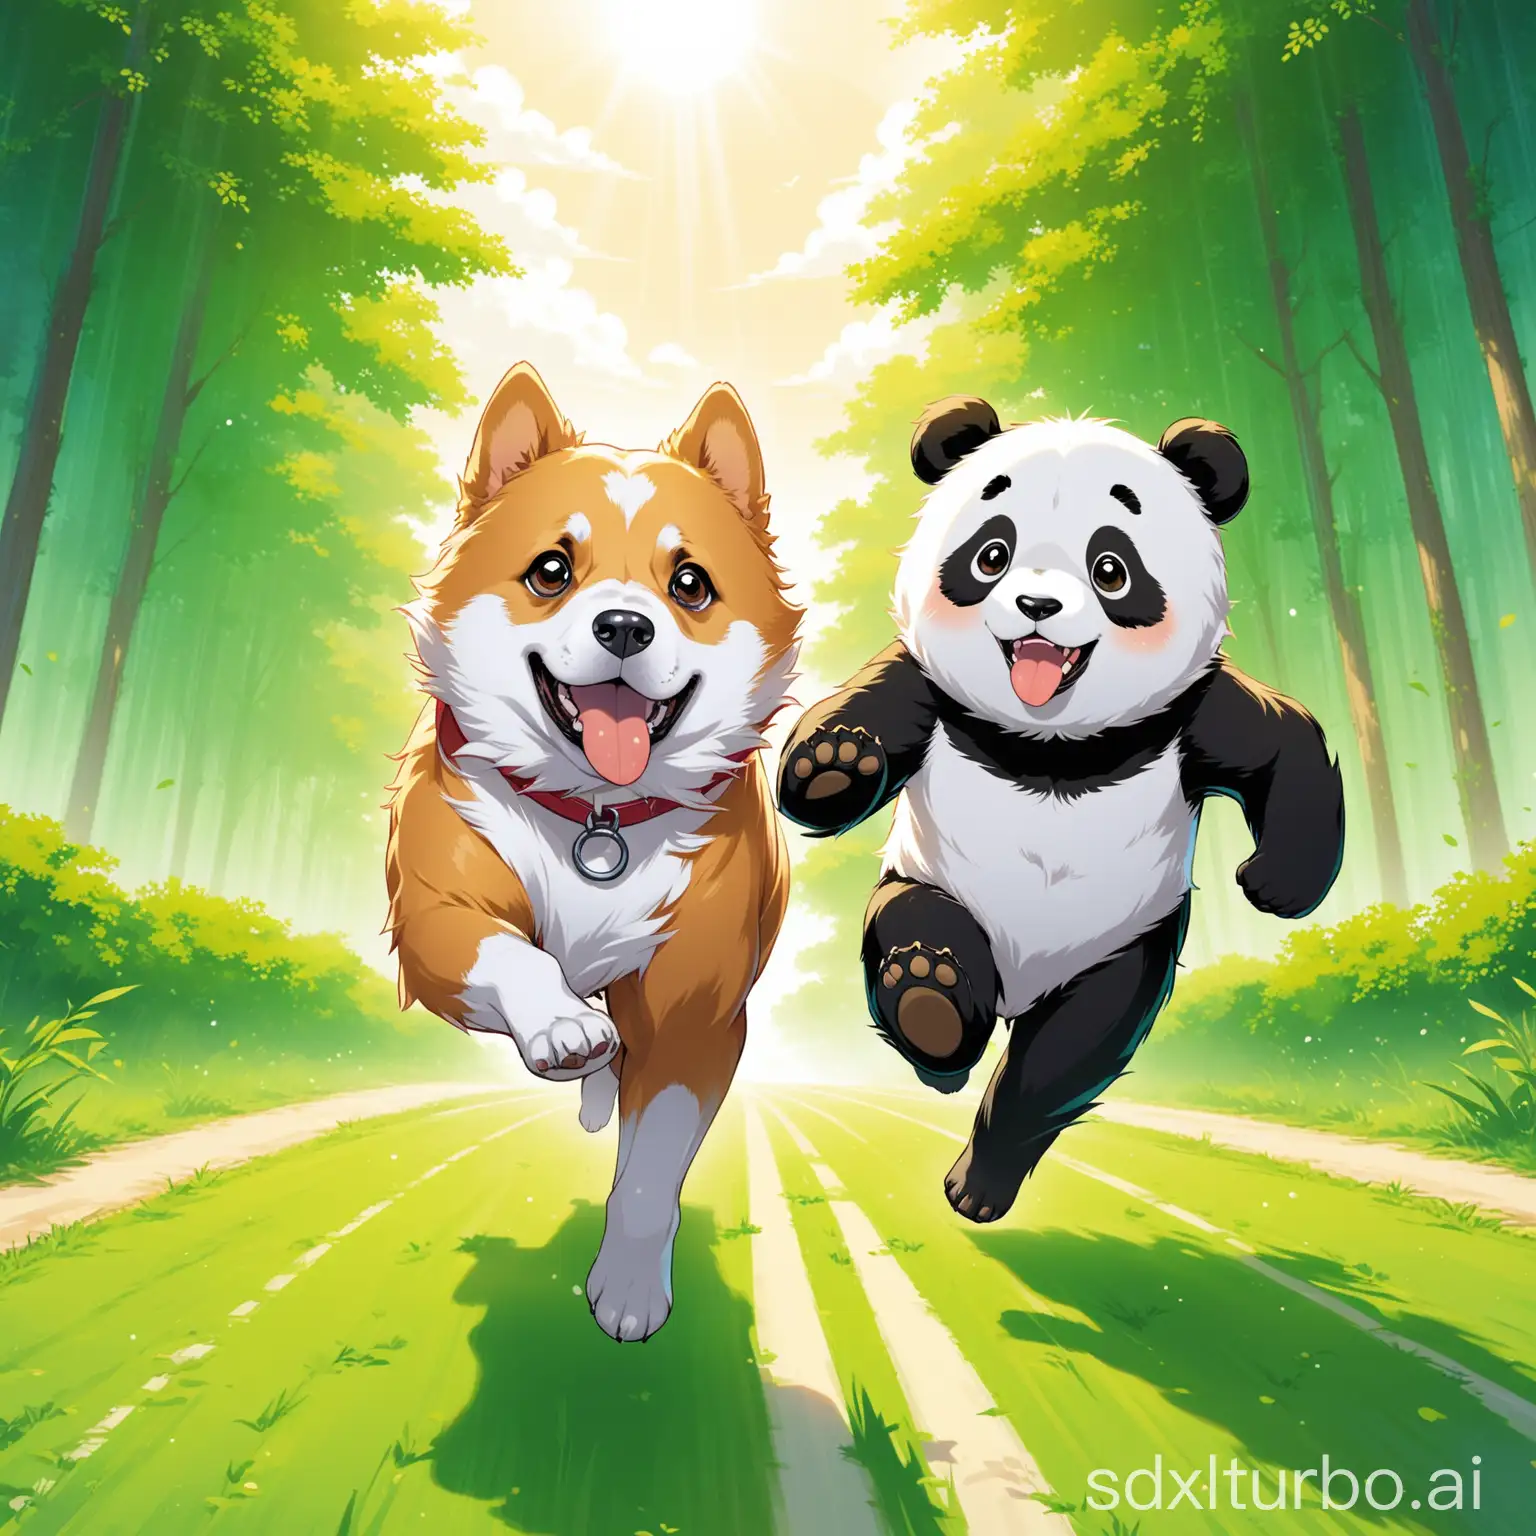 Energetic-Dog-and-Playful-Panda-Running-Together-in-the-Wilderness